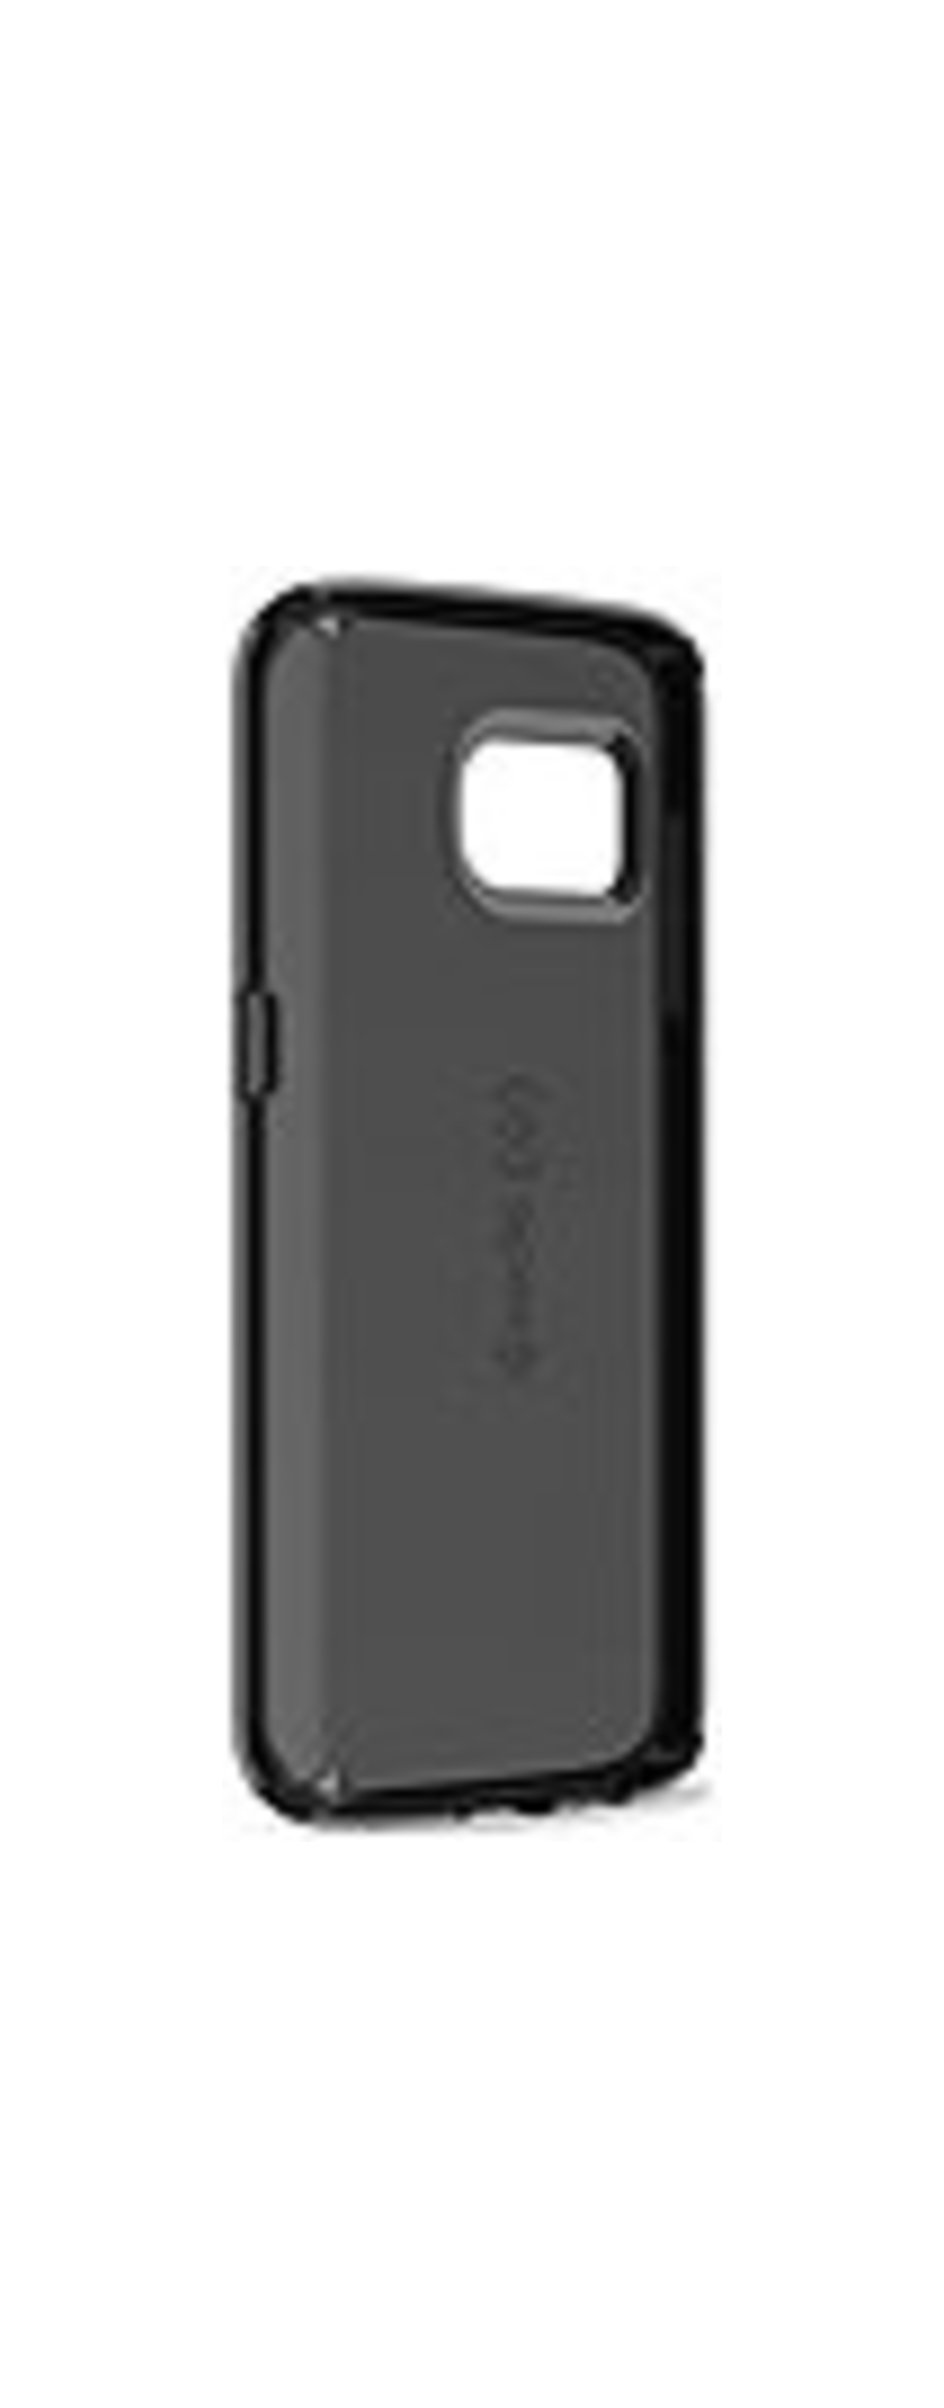 Speck CandyShell Smartphone Case - For Smartphone - Onyx Black - Rubberized - UV Resistant, Yellowing Resistant, Drop Resistant, Shock Absorbing, Impa